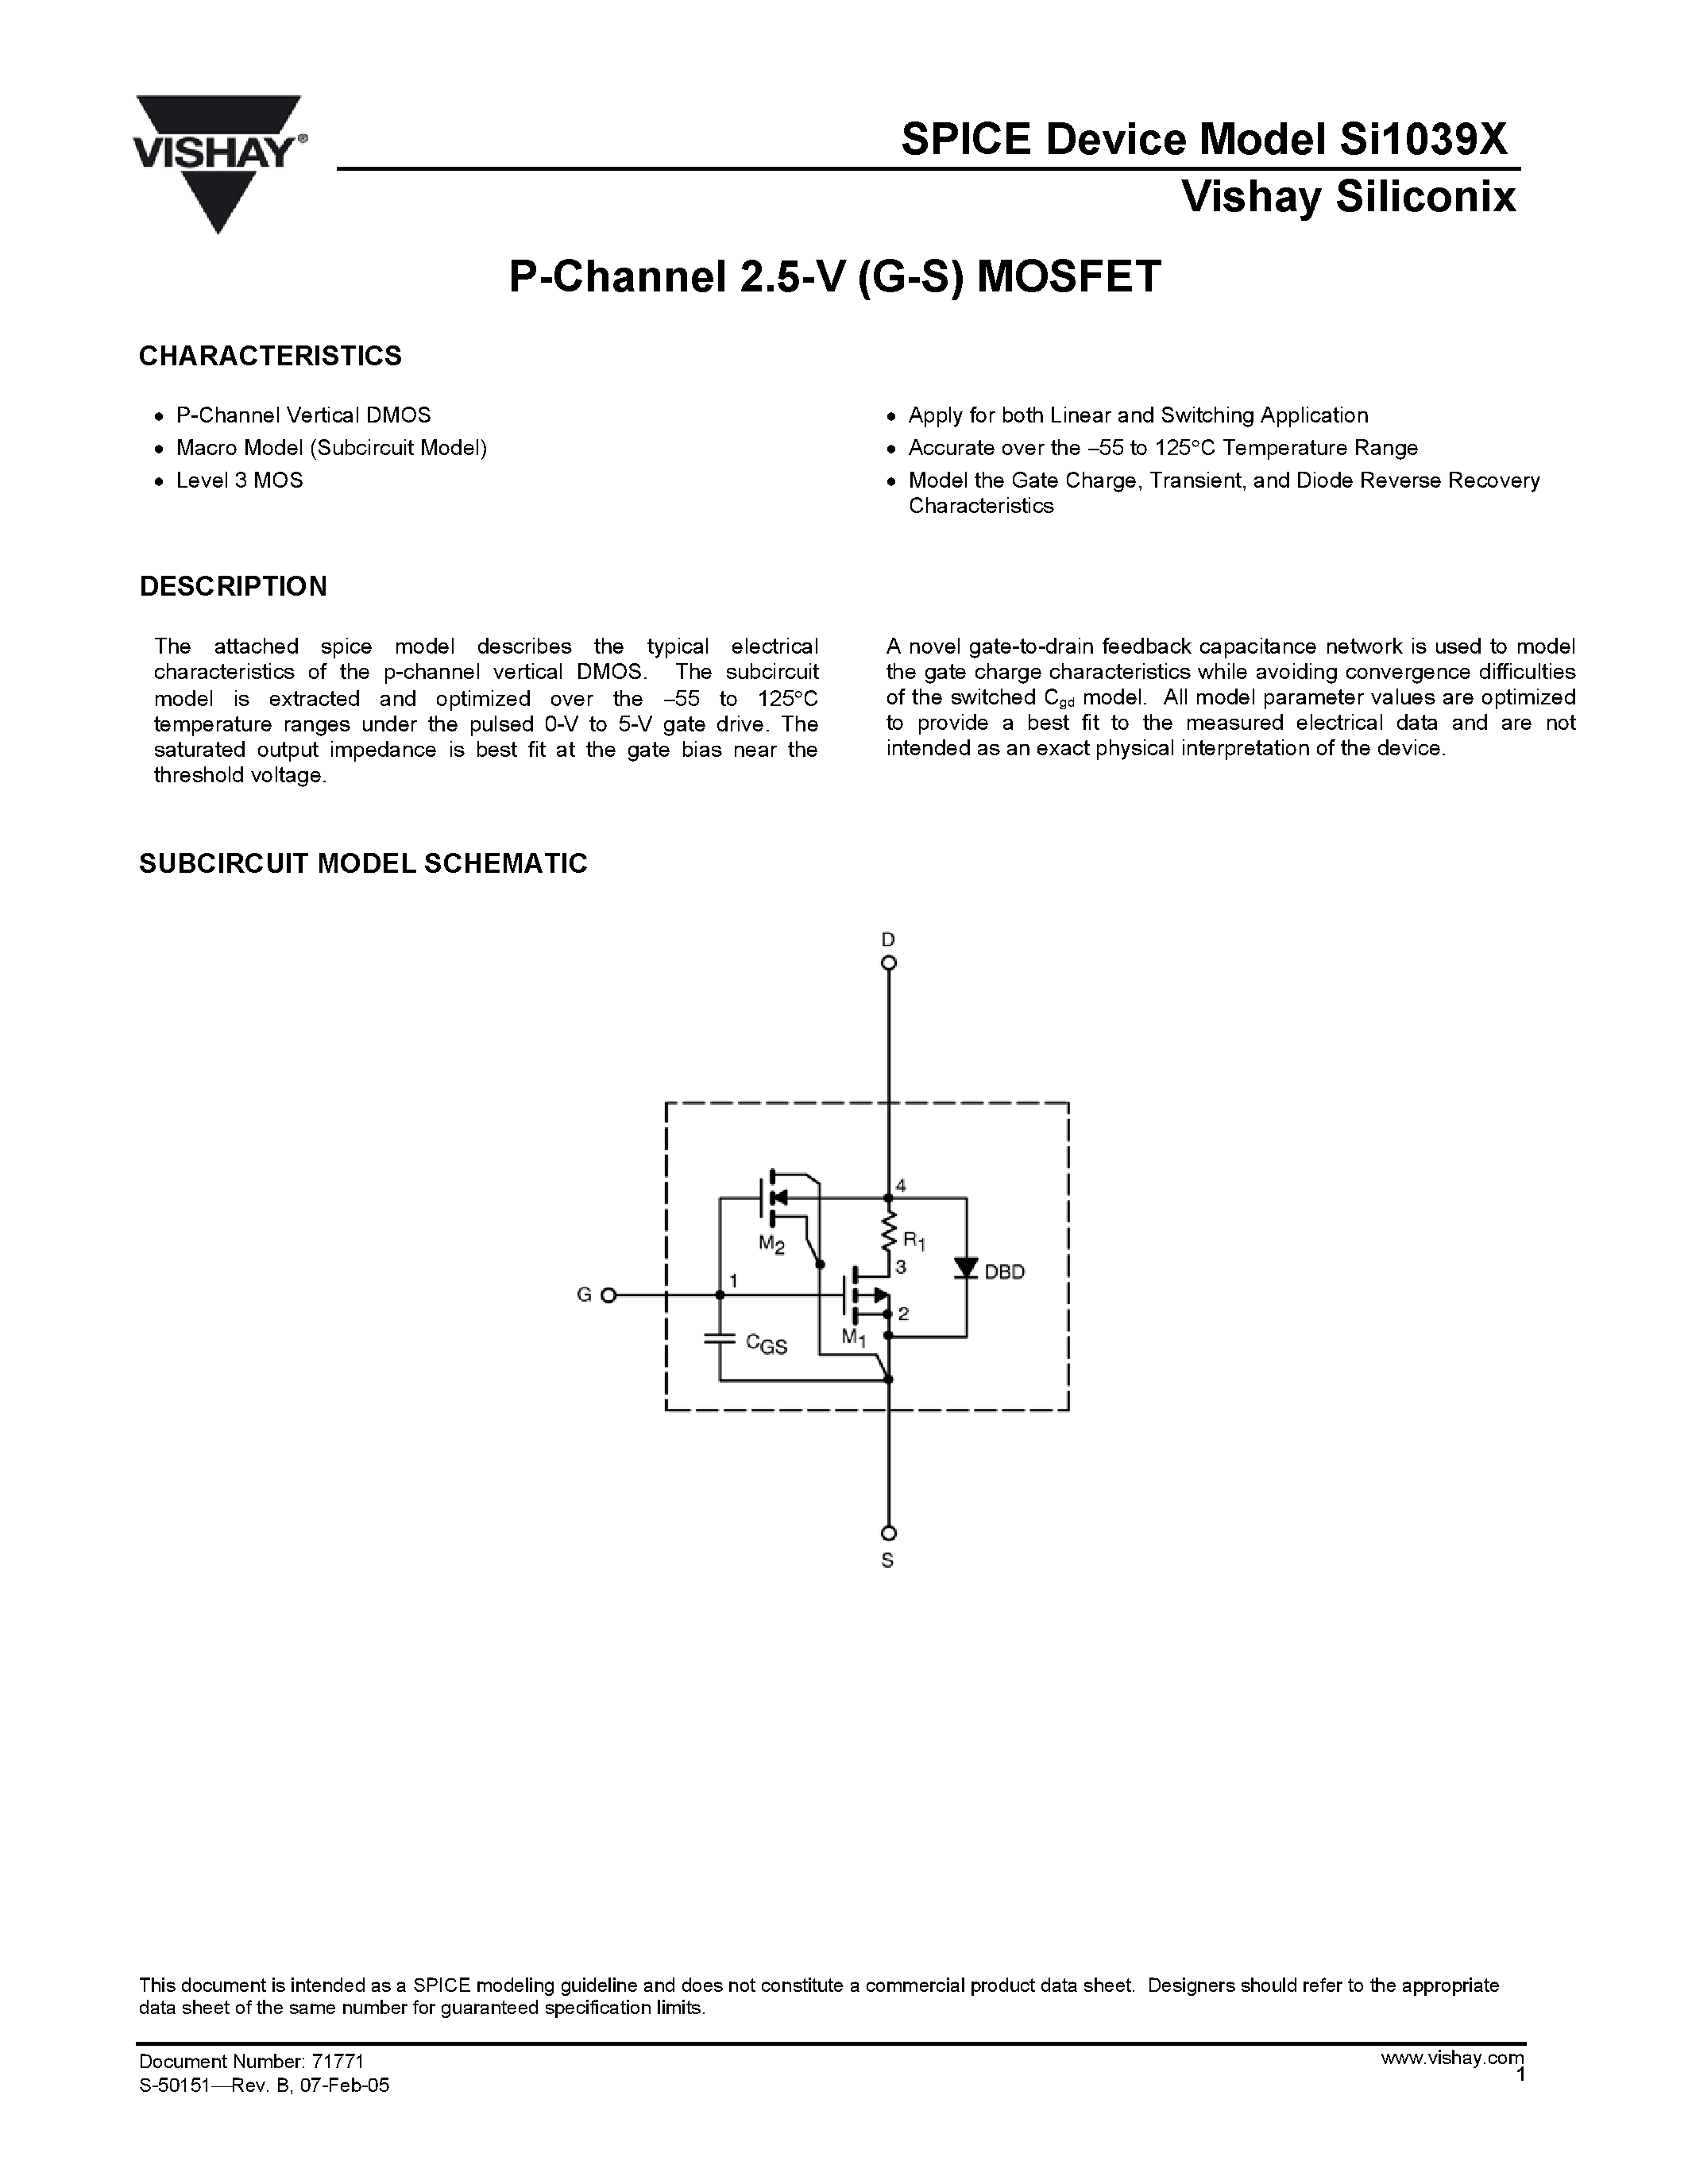 Datasheet SI1039X - P-Channel 2.5-V (G-S) MOSFET page 1